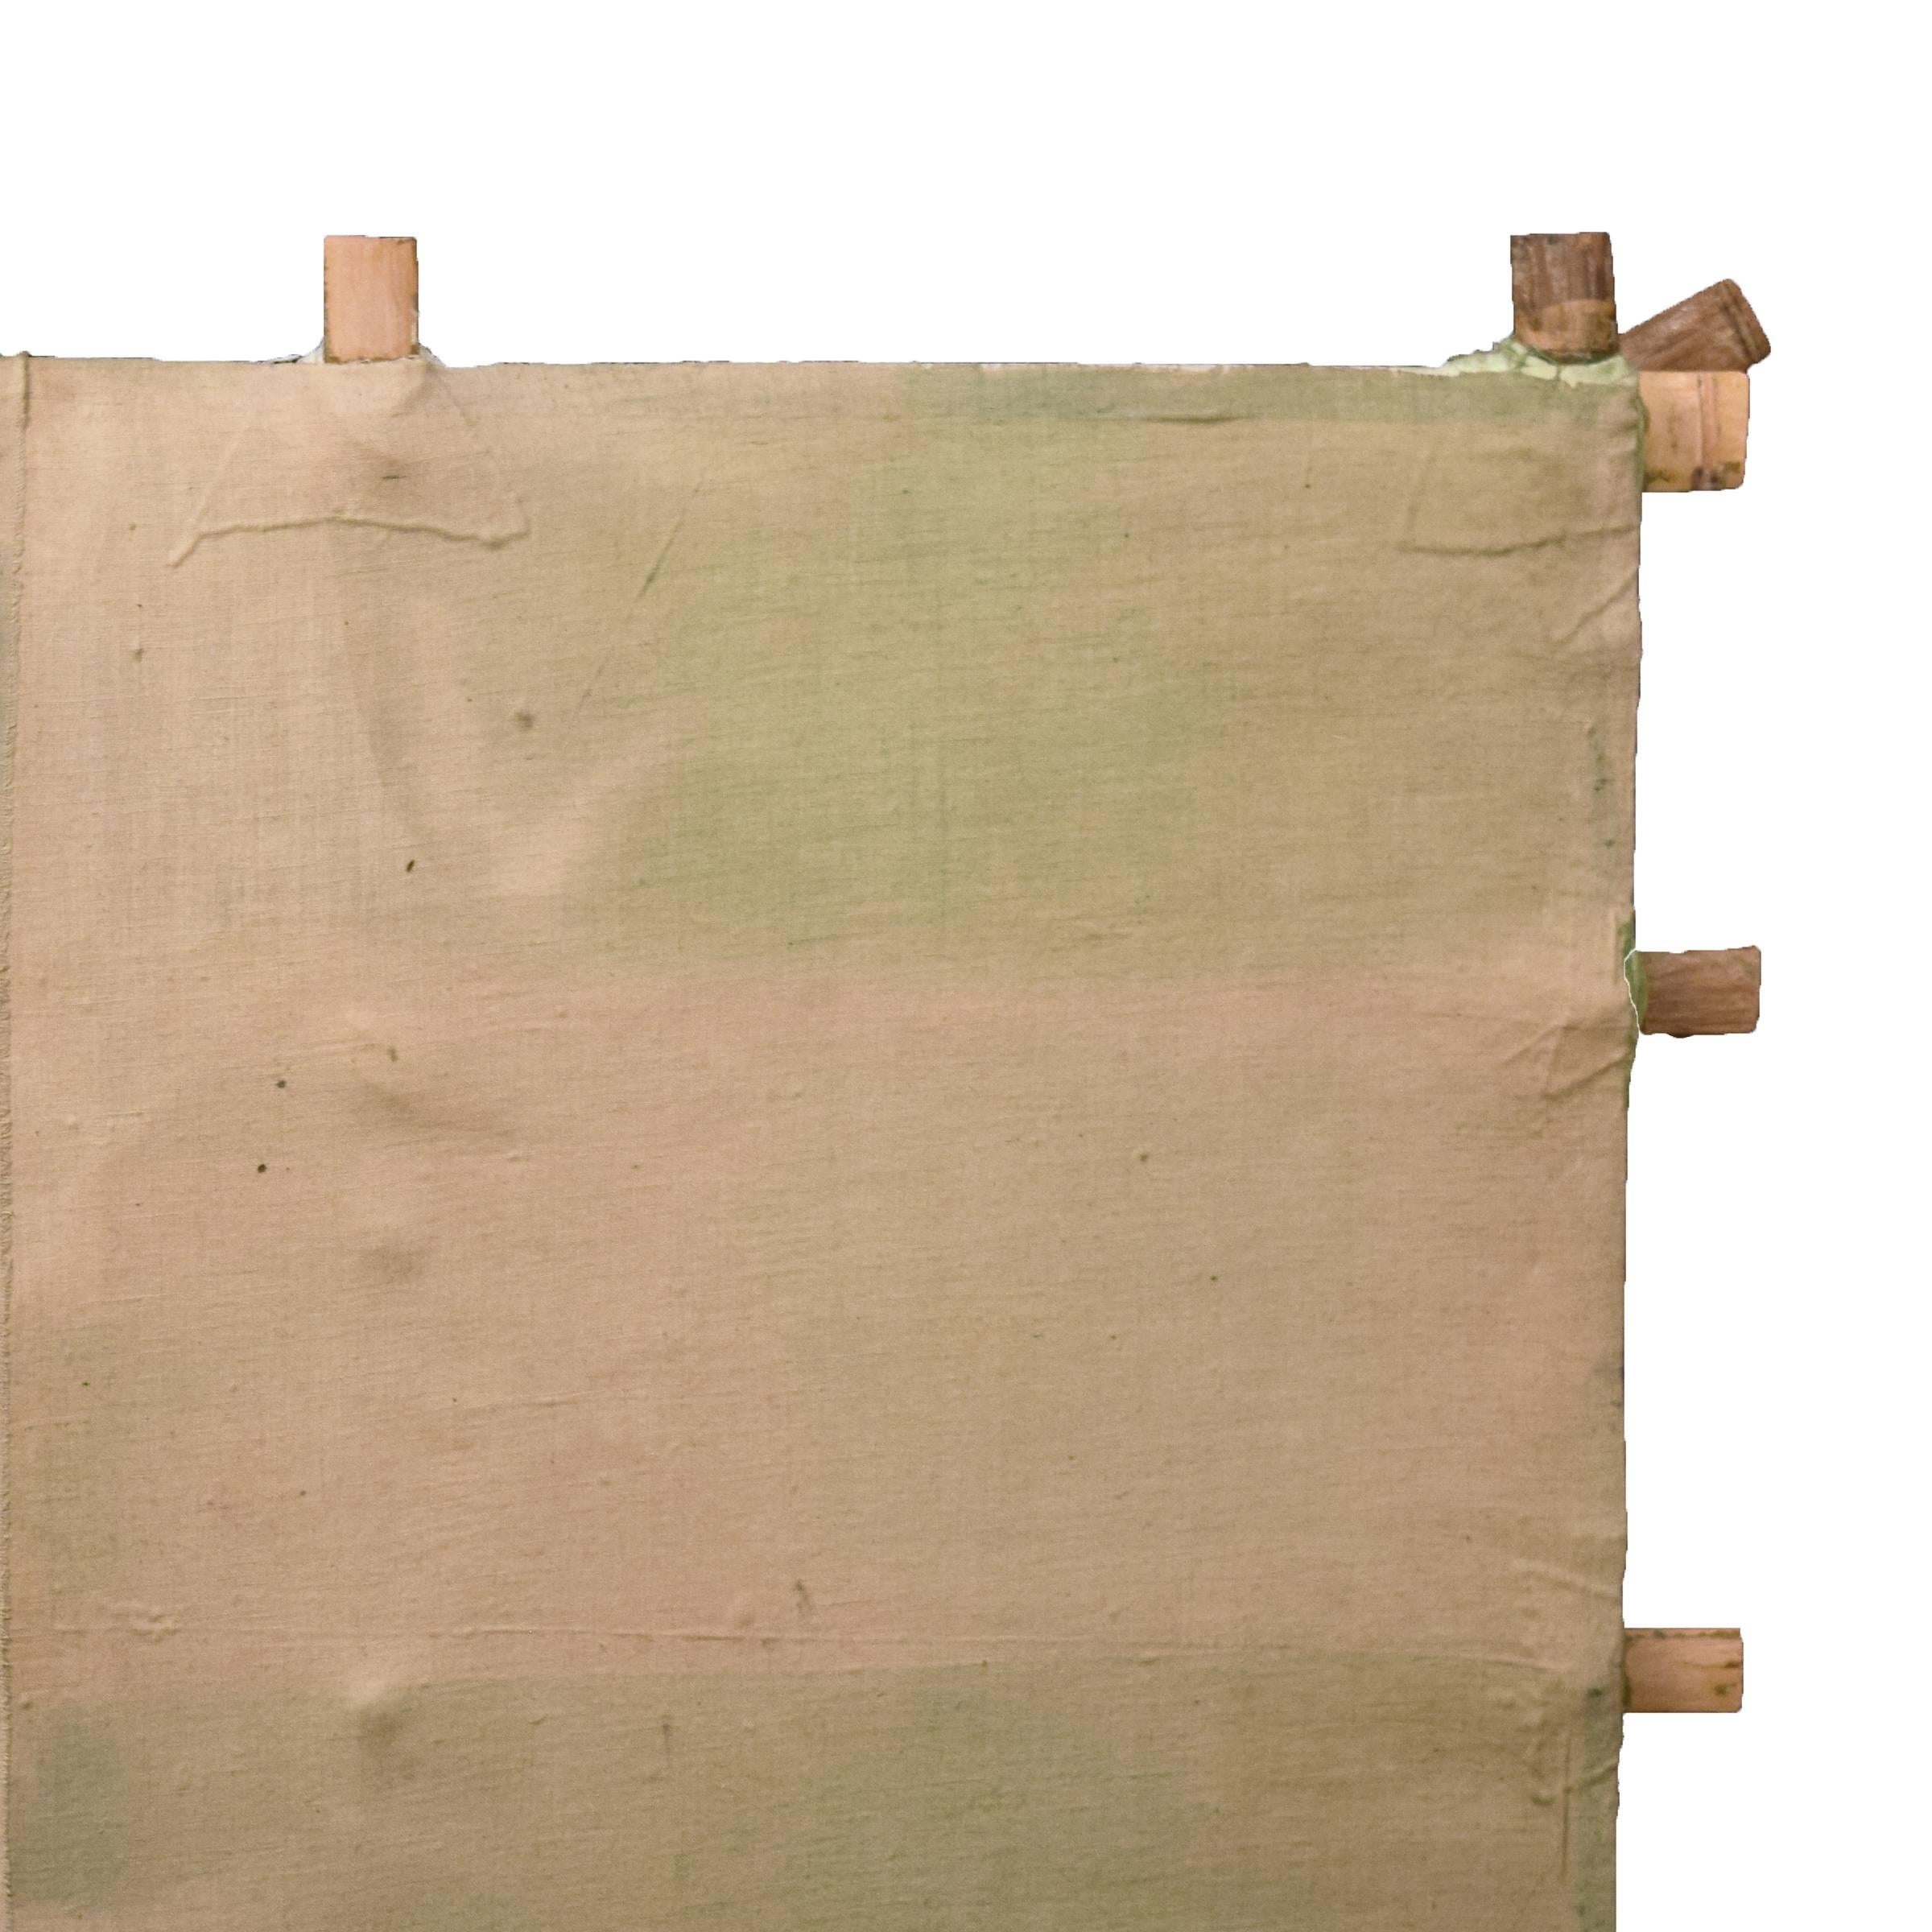 This unique kite by Chicago-based artist Michael Thompson, "High Tide," is crafted from a split bamboo frame covered with stretched muslin and delicate paper. A striae effect of green surface among warm, earthy tones. Thompson’s kites